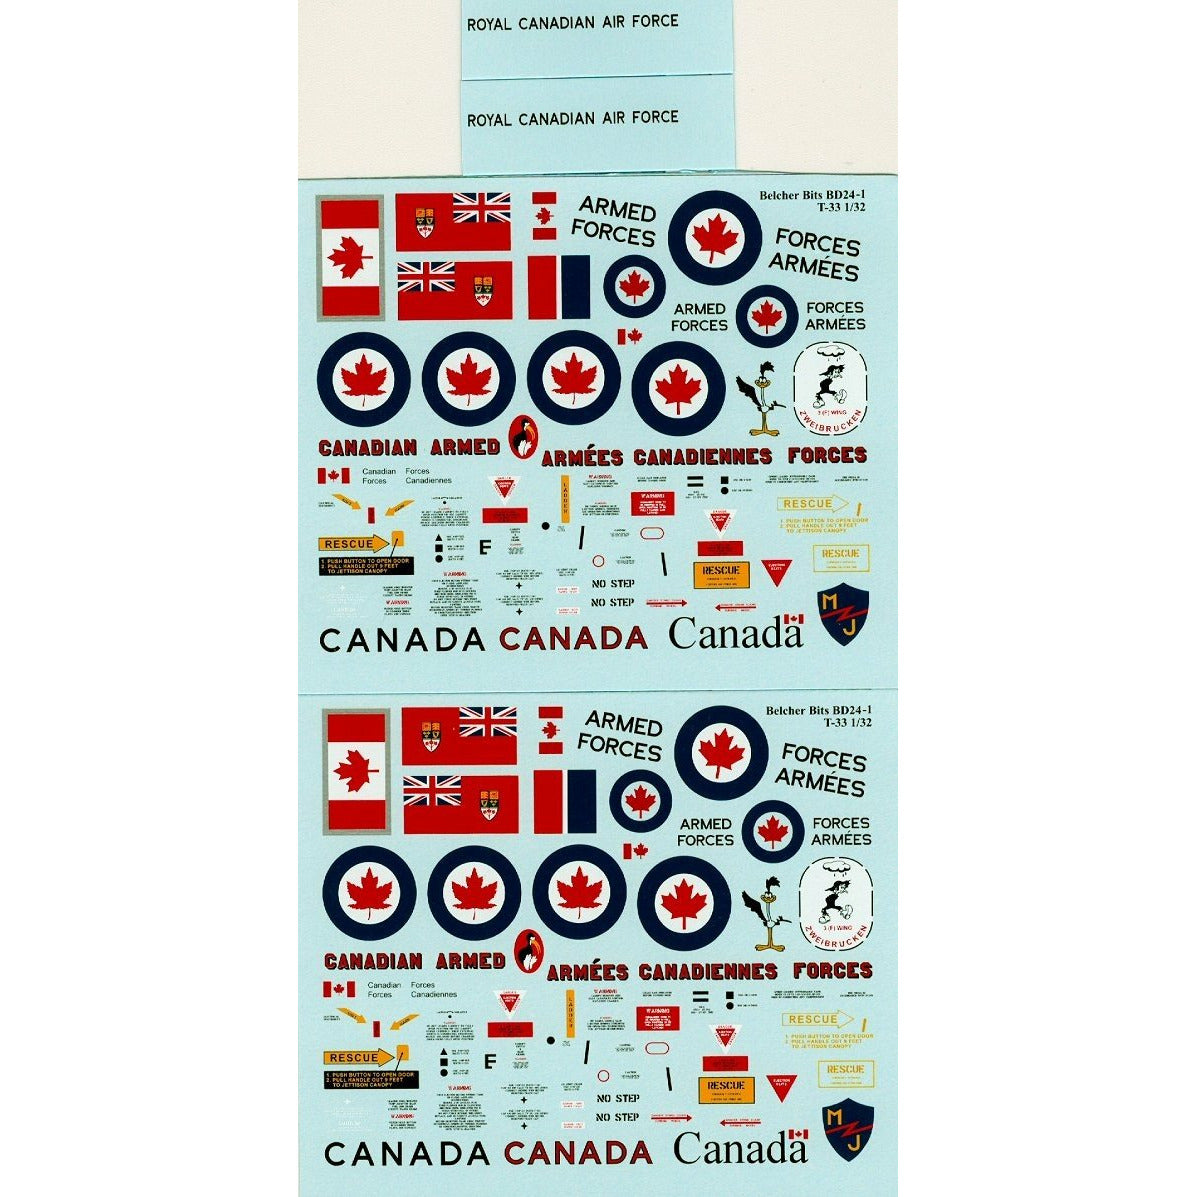 1/32 Canadian T-33 Silver Star decals